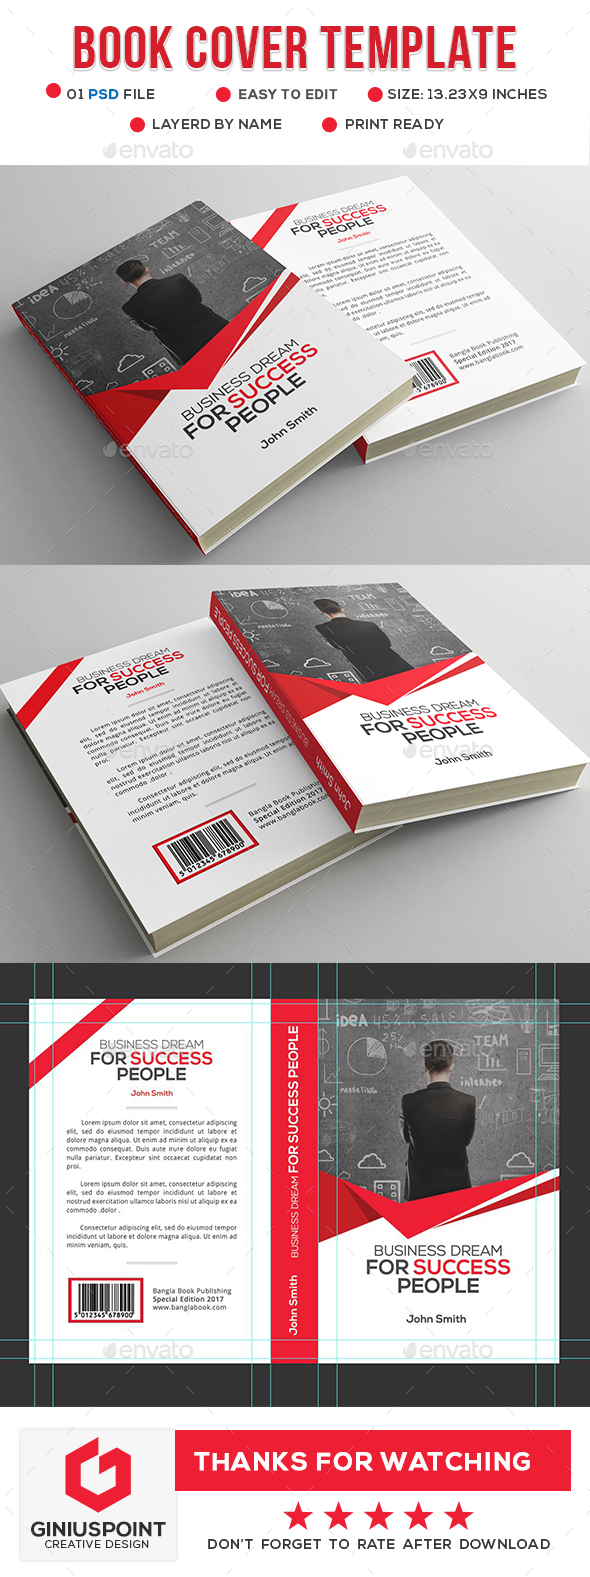 Editable Book Cover Template